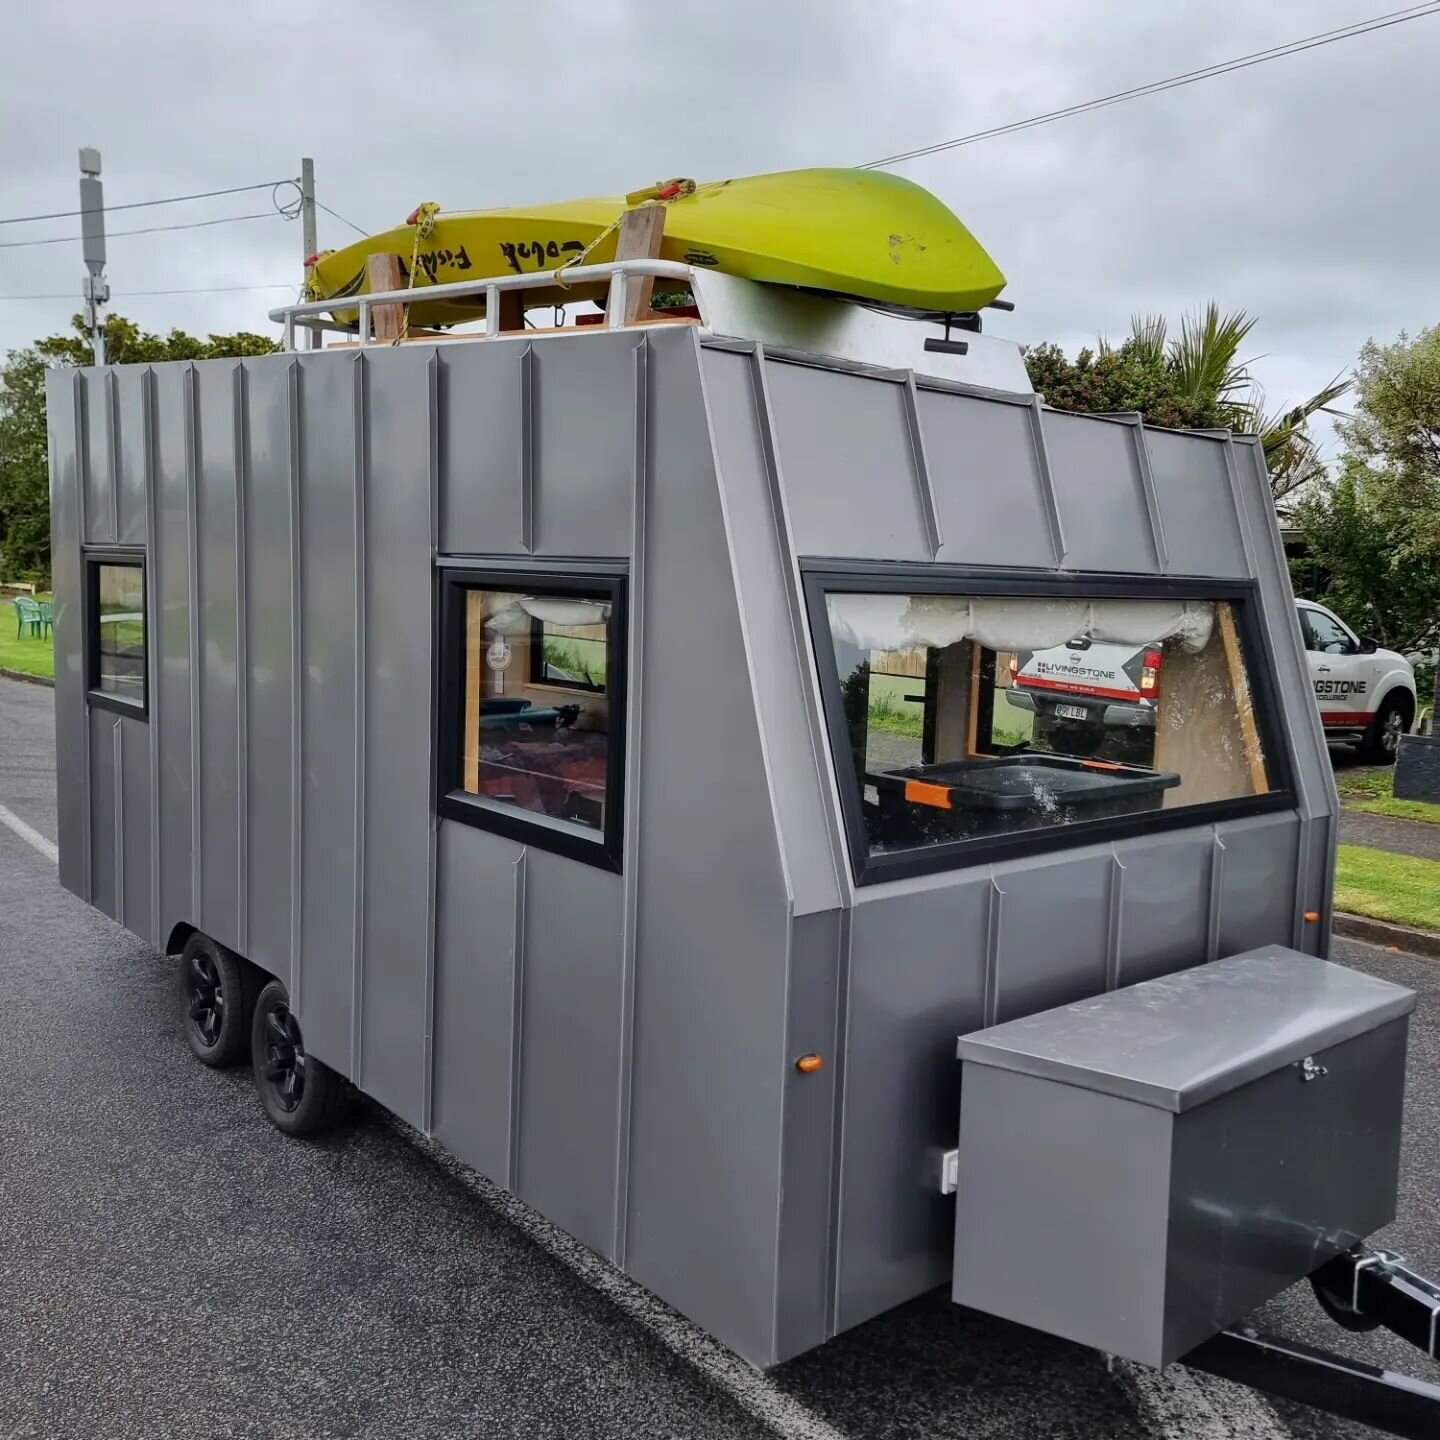 The maiden voyage for my custom caravan prototype was a huge success. We traveled the length of the north island without a hiccup! Designed by myself and with help from my local tradies we completed it just in time for the Xmas break! Im hoping to ha